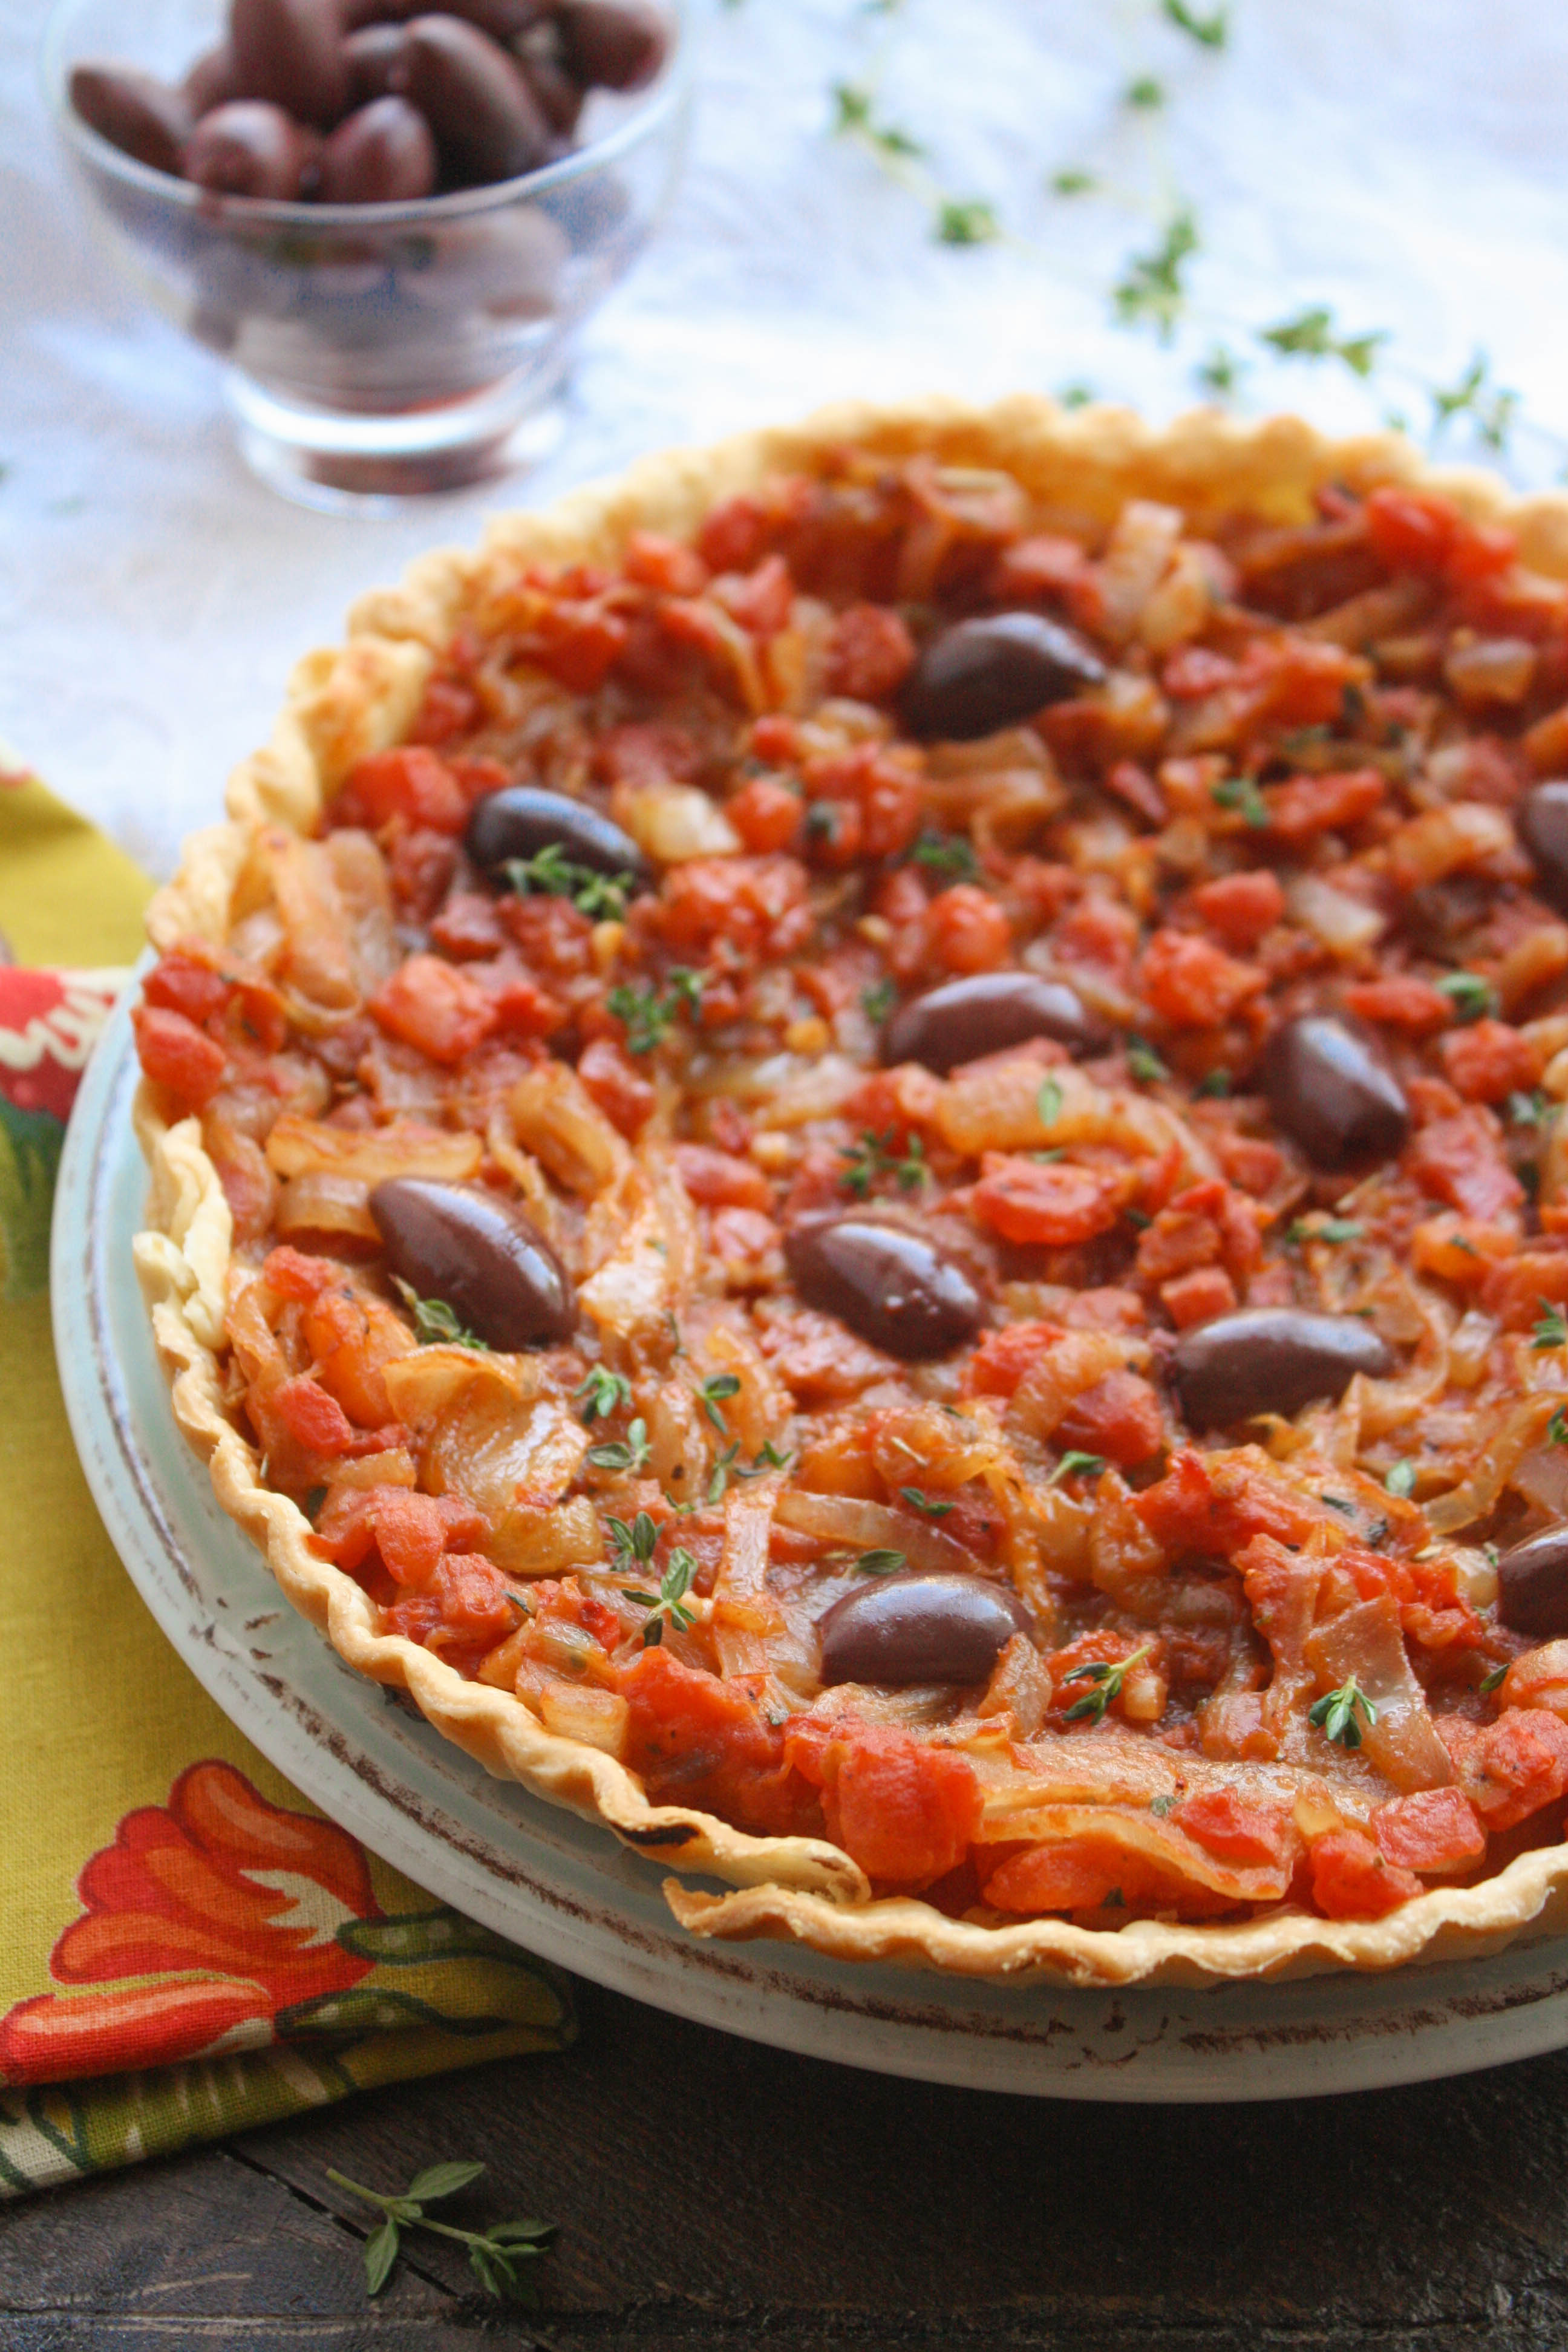 Pissaladière (French-style pizza) is an easy appetizer to make. You'll love all the wonderful flavors that combine in this dish.